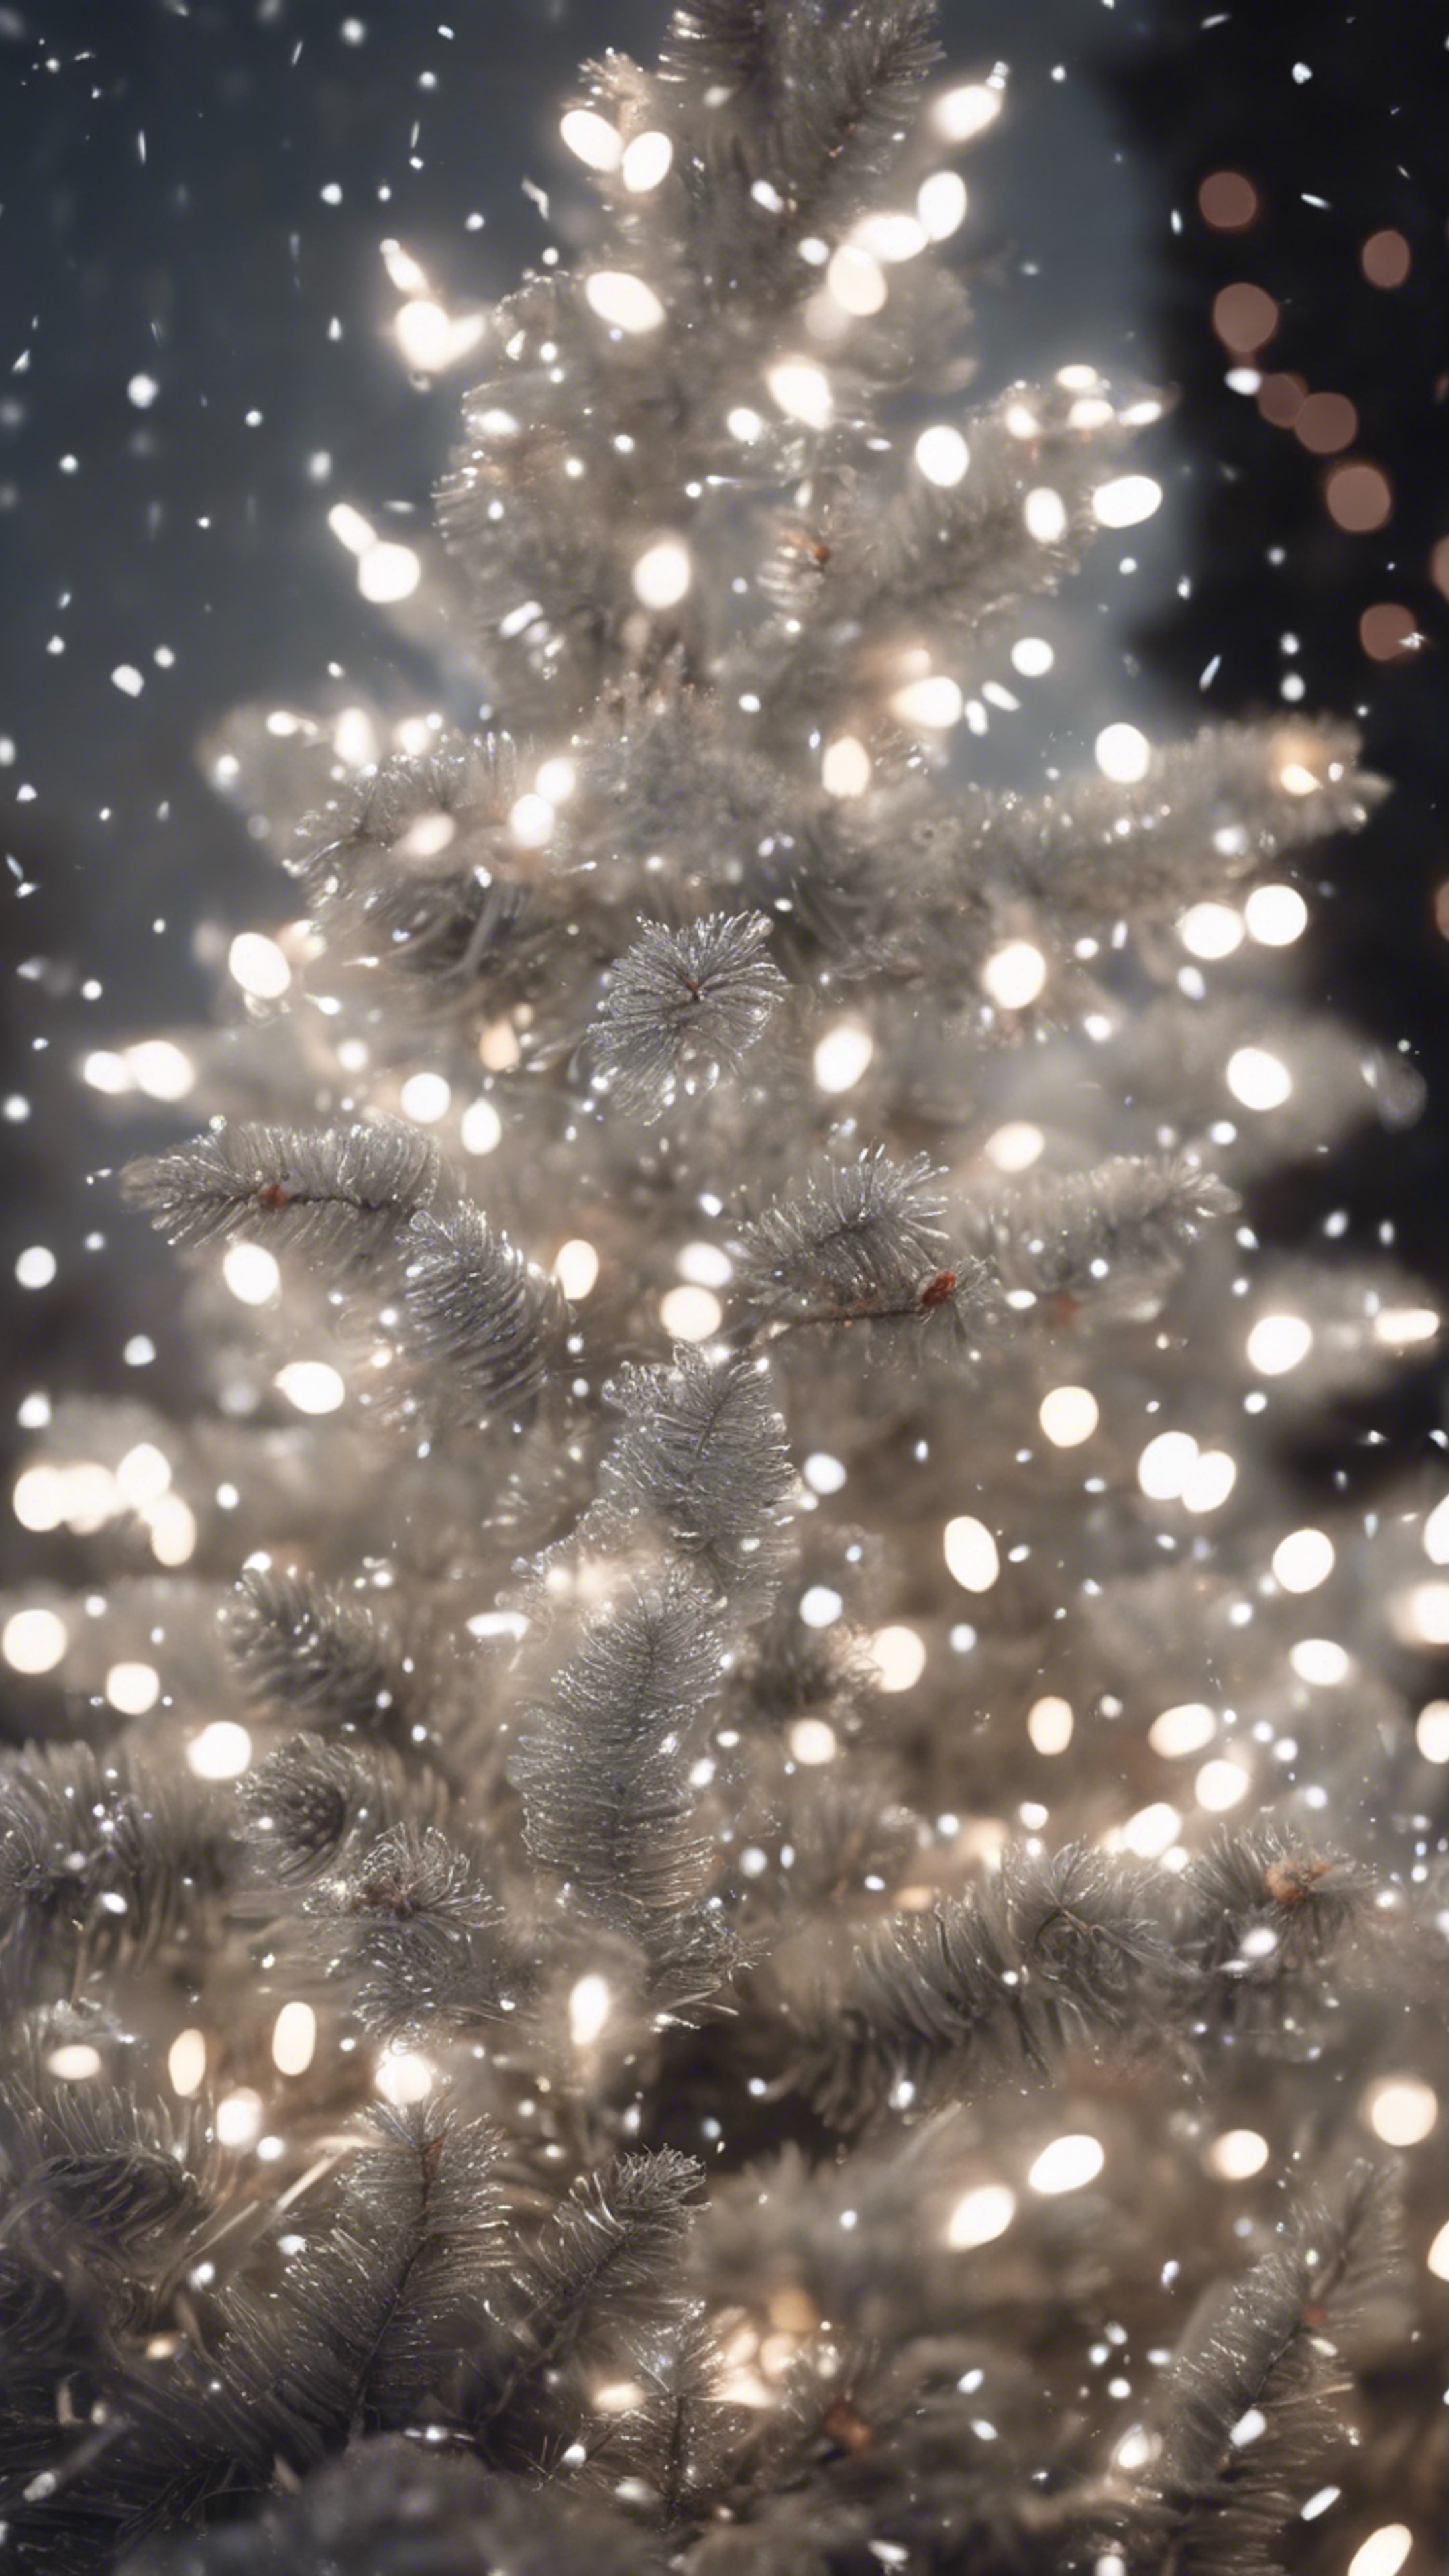 White Christmas lights shimmering on a silver spruce tree, with delicate snowflakes falling around. Behang[aebc3baa8421448a9f7c]